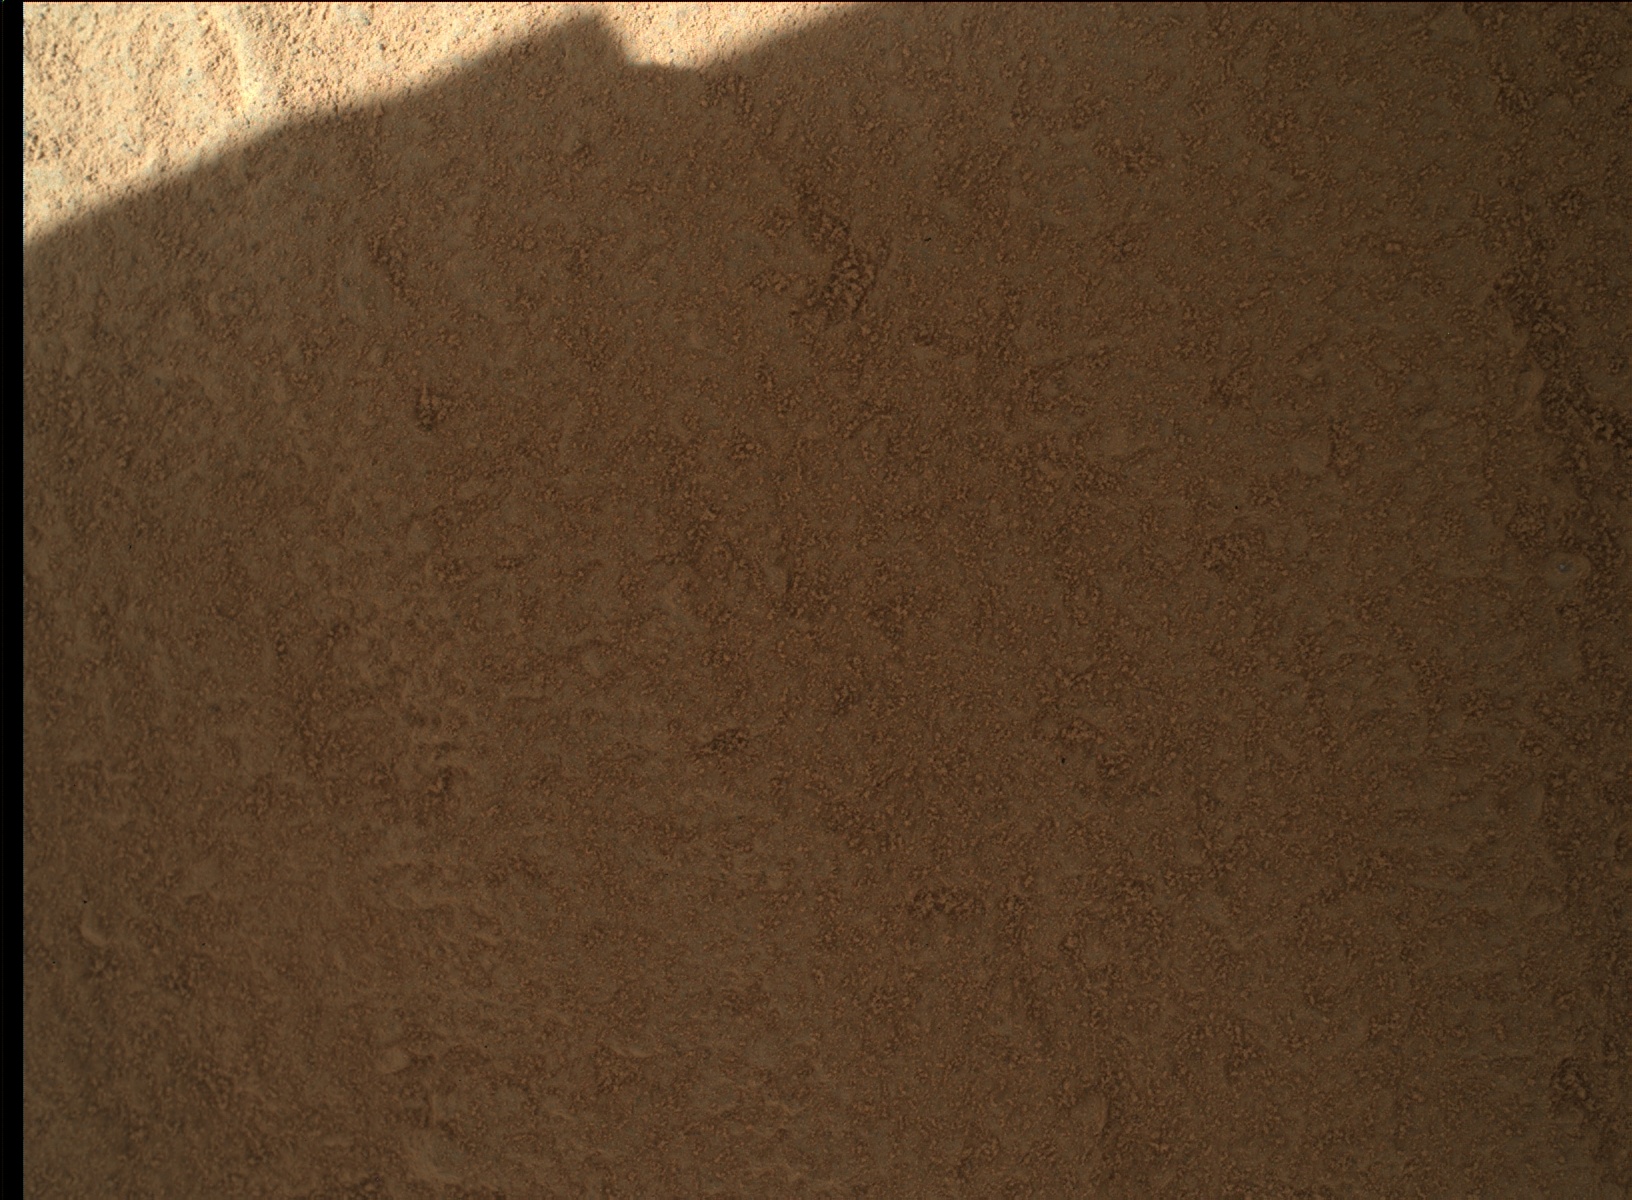 Nasa's Mars rover Curiosity acquired this image using its Mars Hand Lens Imager (MAHLI) on Sol 486